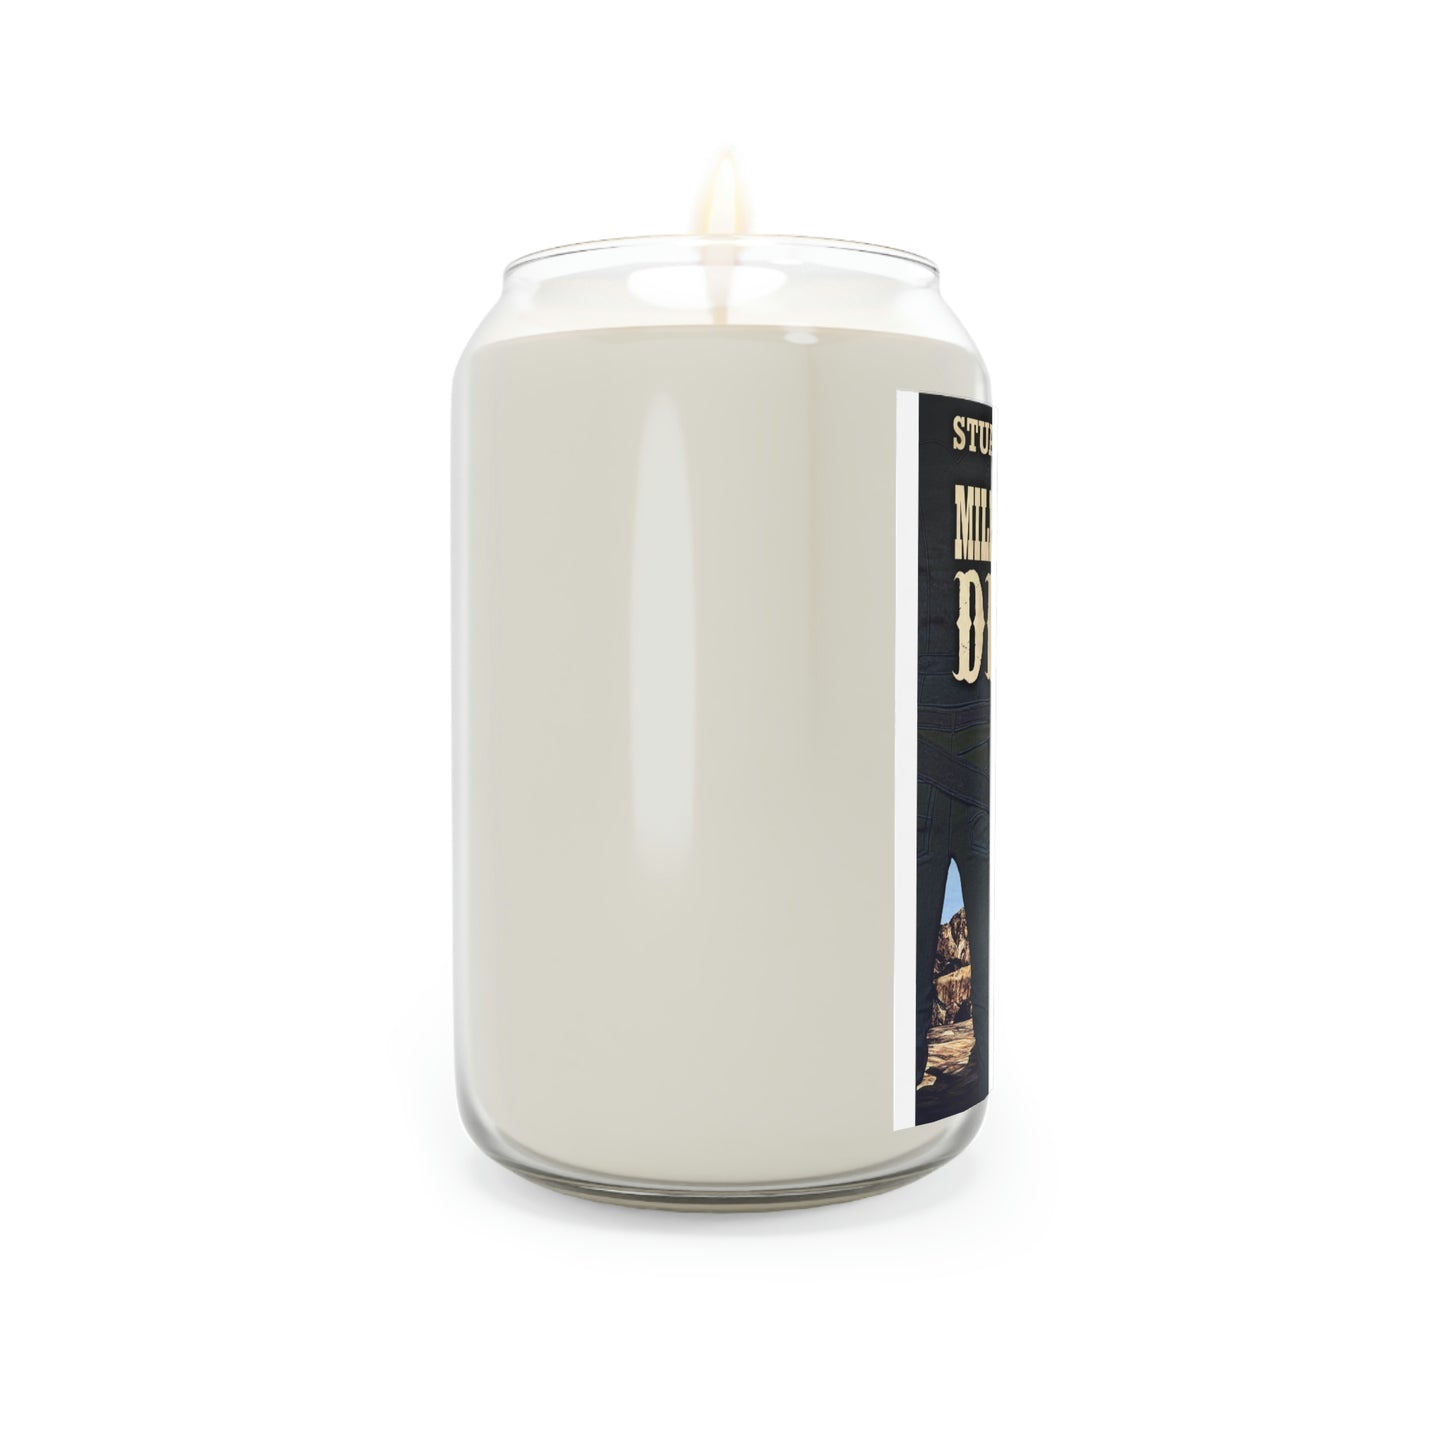 Milky Trail To Death - Scented Candle